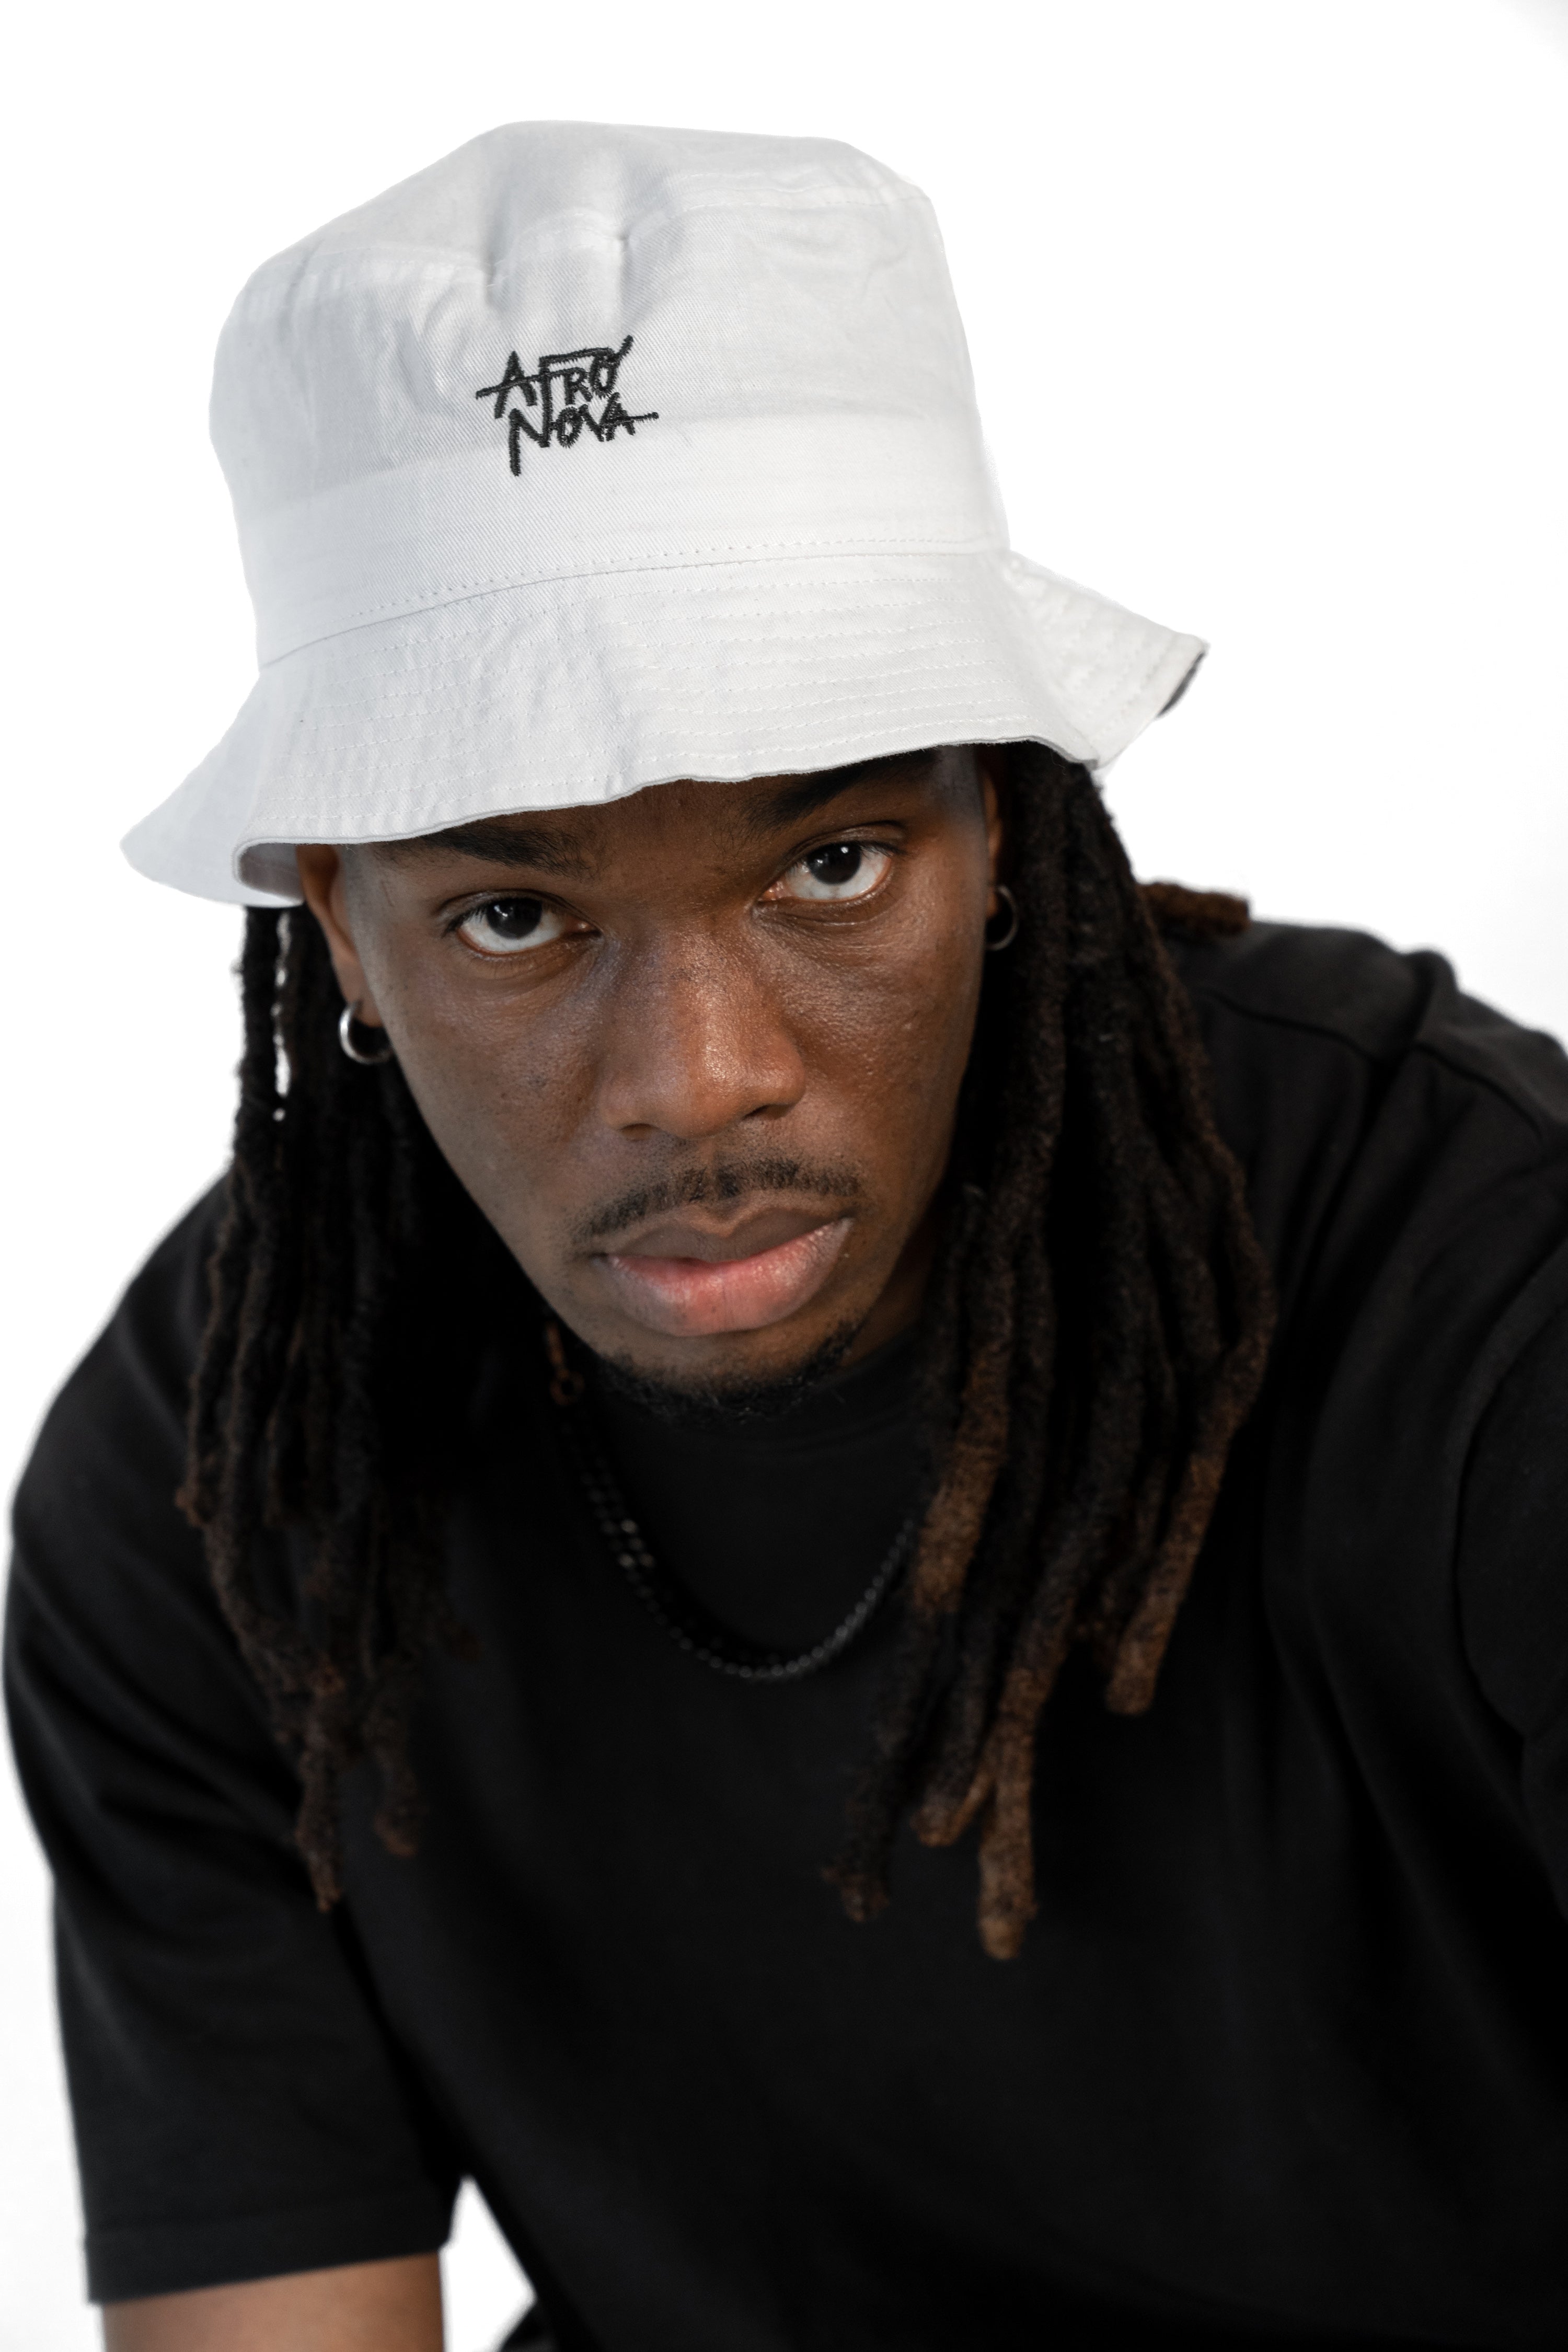 Black man with dreadlocks and white bucket hat